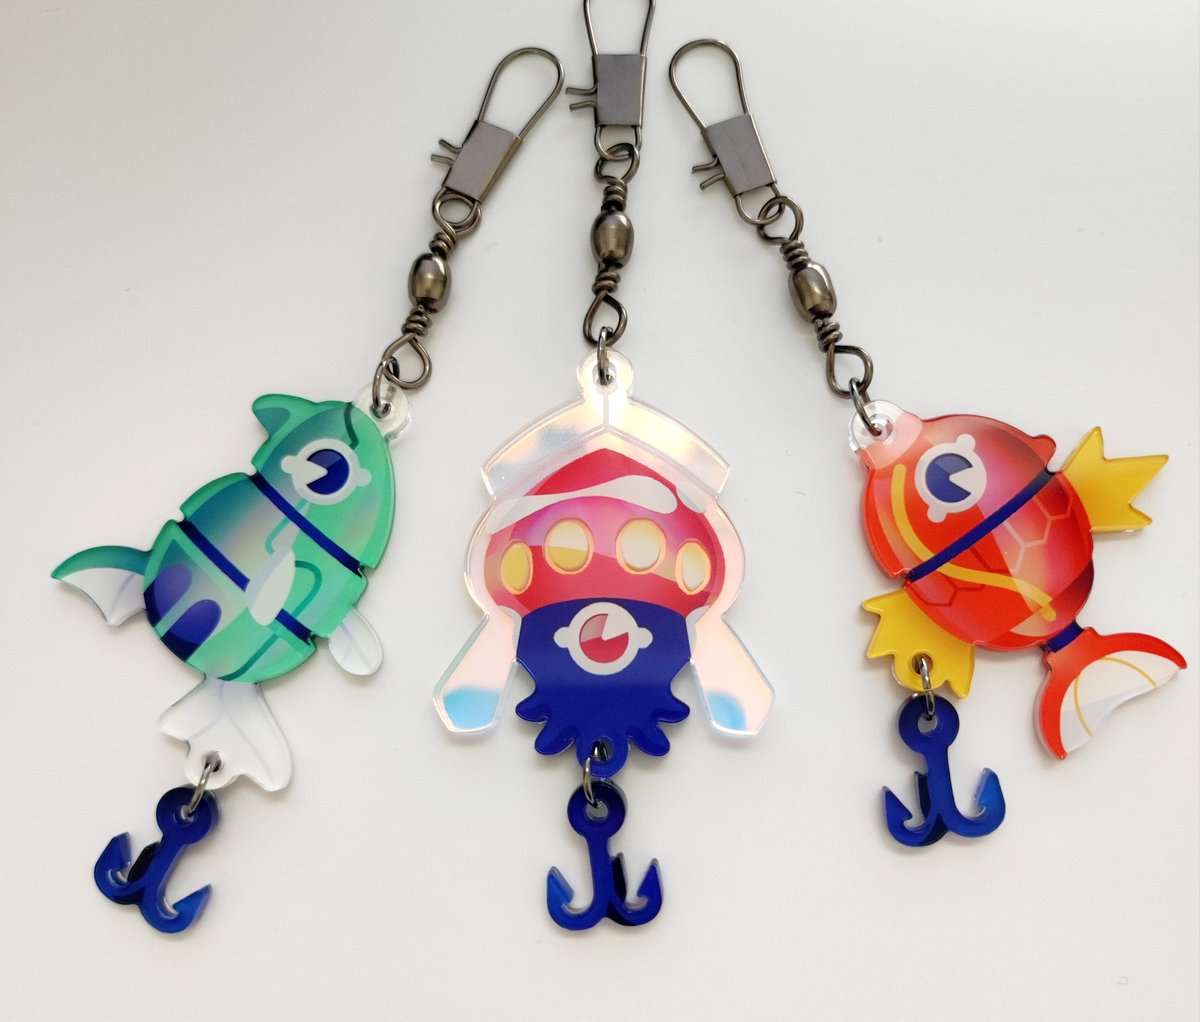 My new keychains with real fishing equipment for the claps (will be available in july)